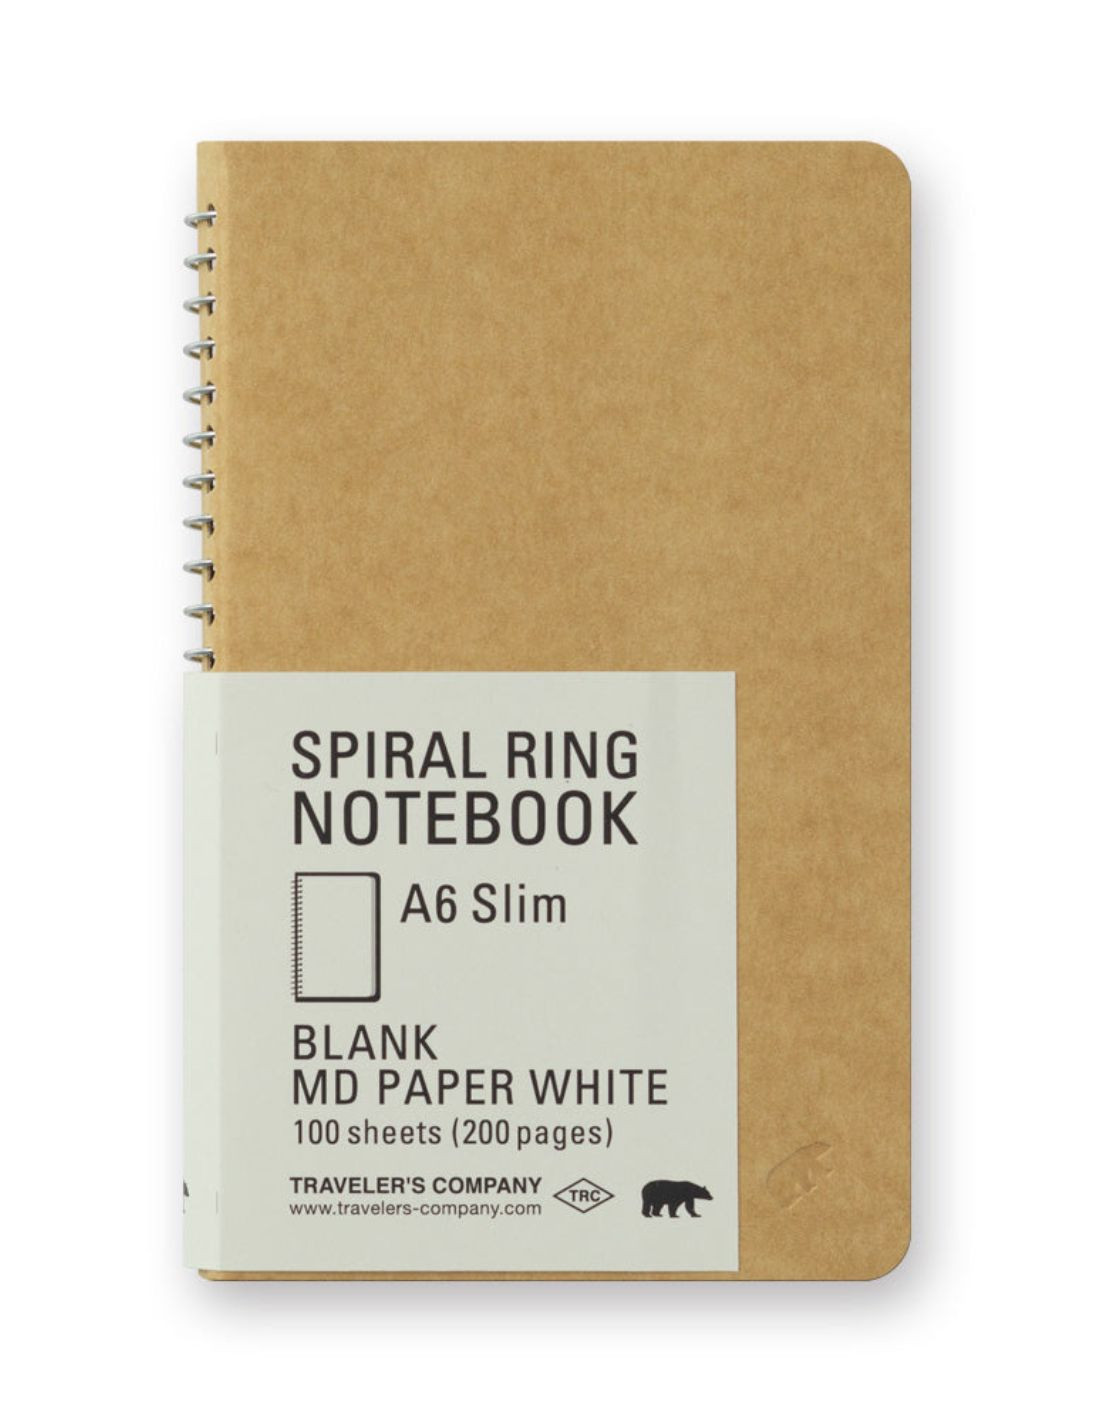 A6 Slim Blank MD Paper White - Spiral Ring Notebook - Traveler's Company